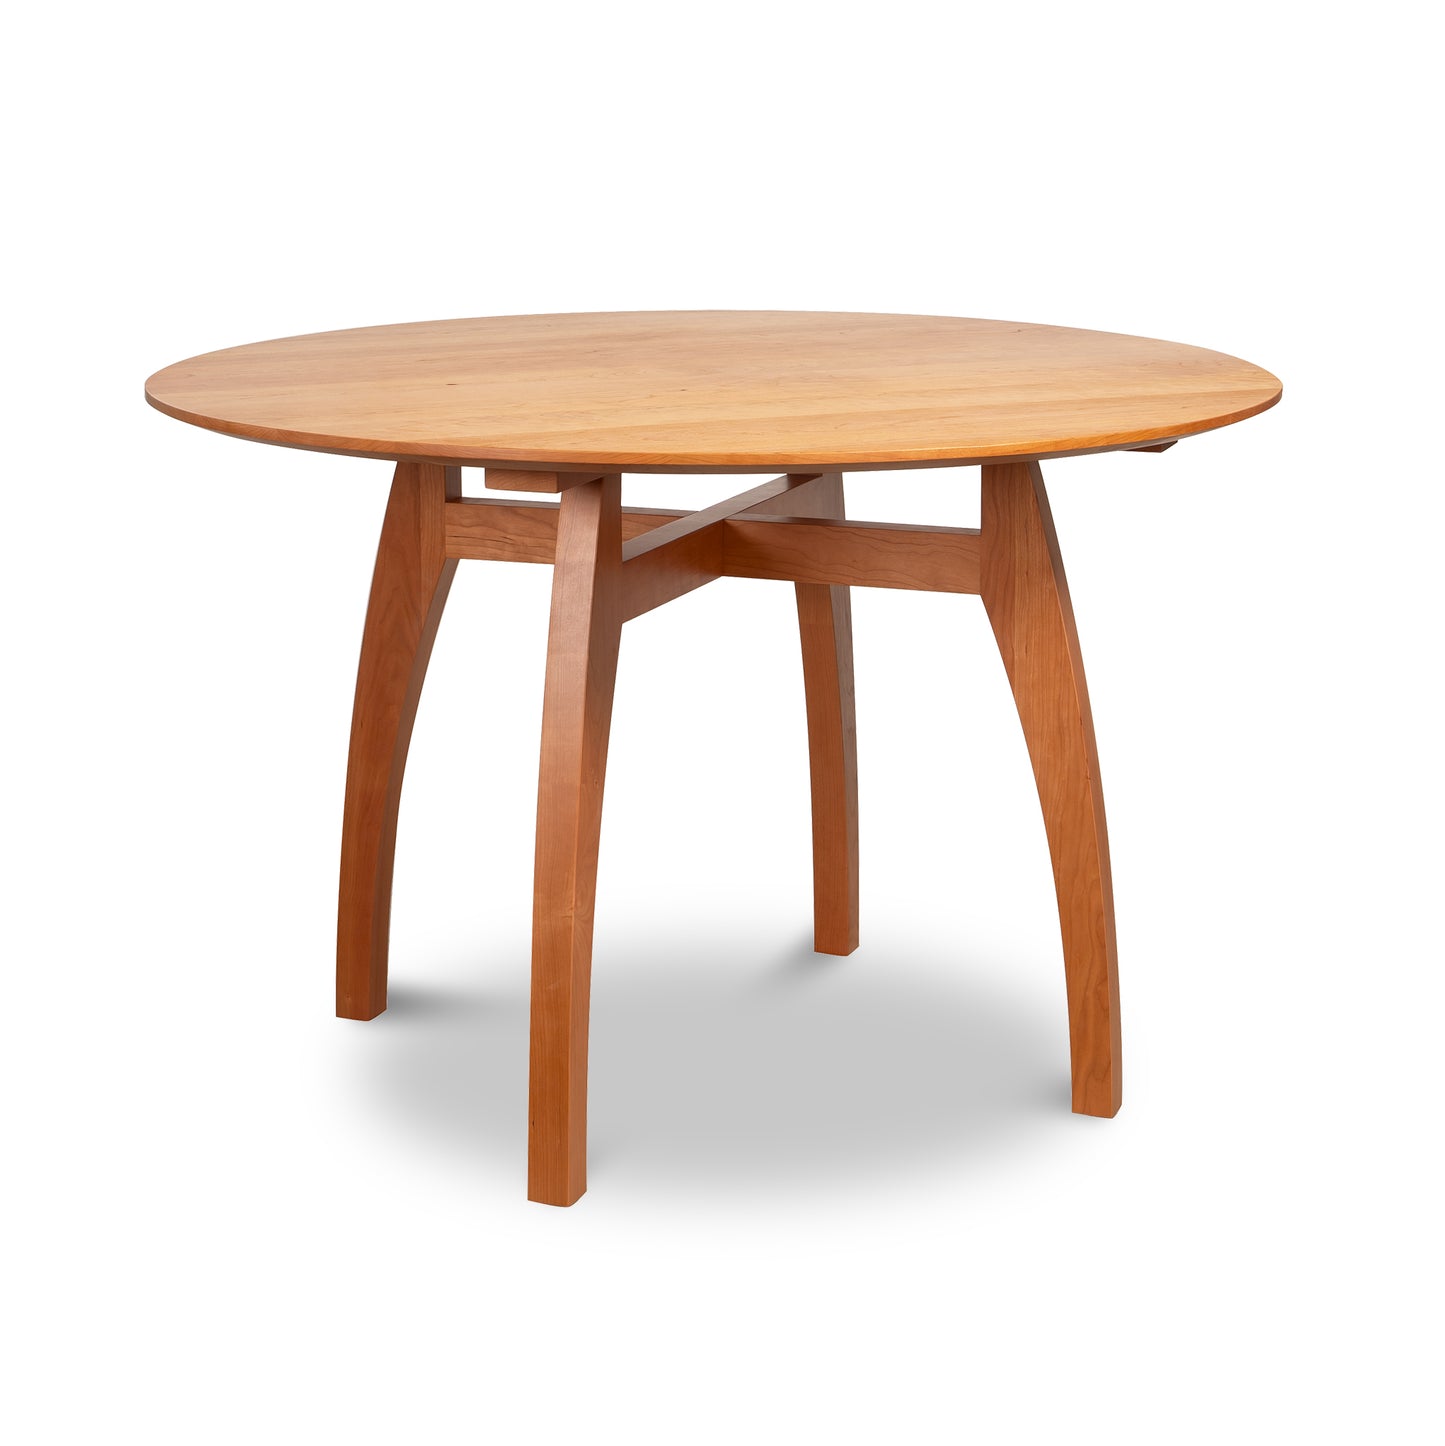 A handmade wooden top round table with two legs, the Lyndon Furniture Vermont Modern 48" Solid Top Pedestal Table - Floor Model.